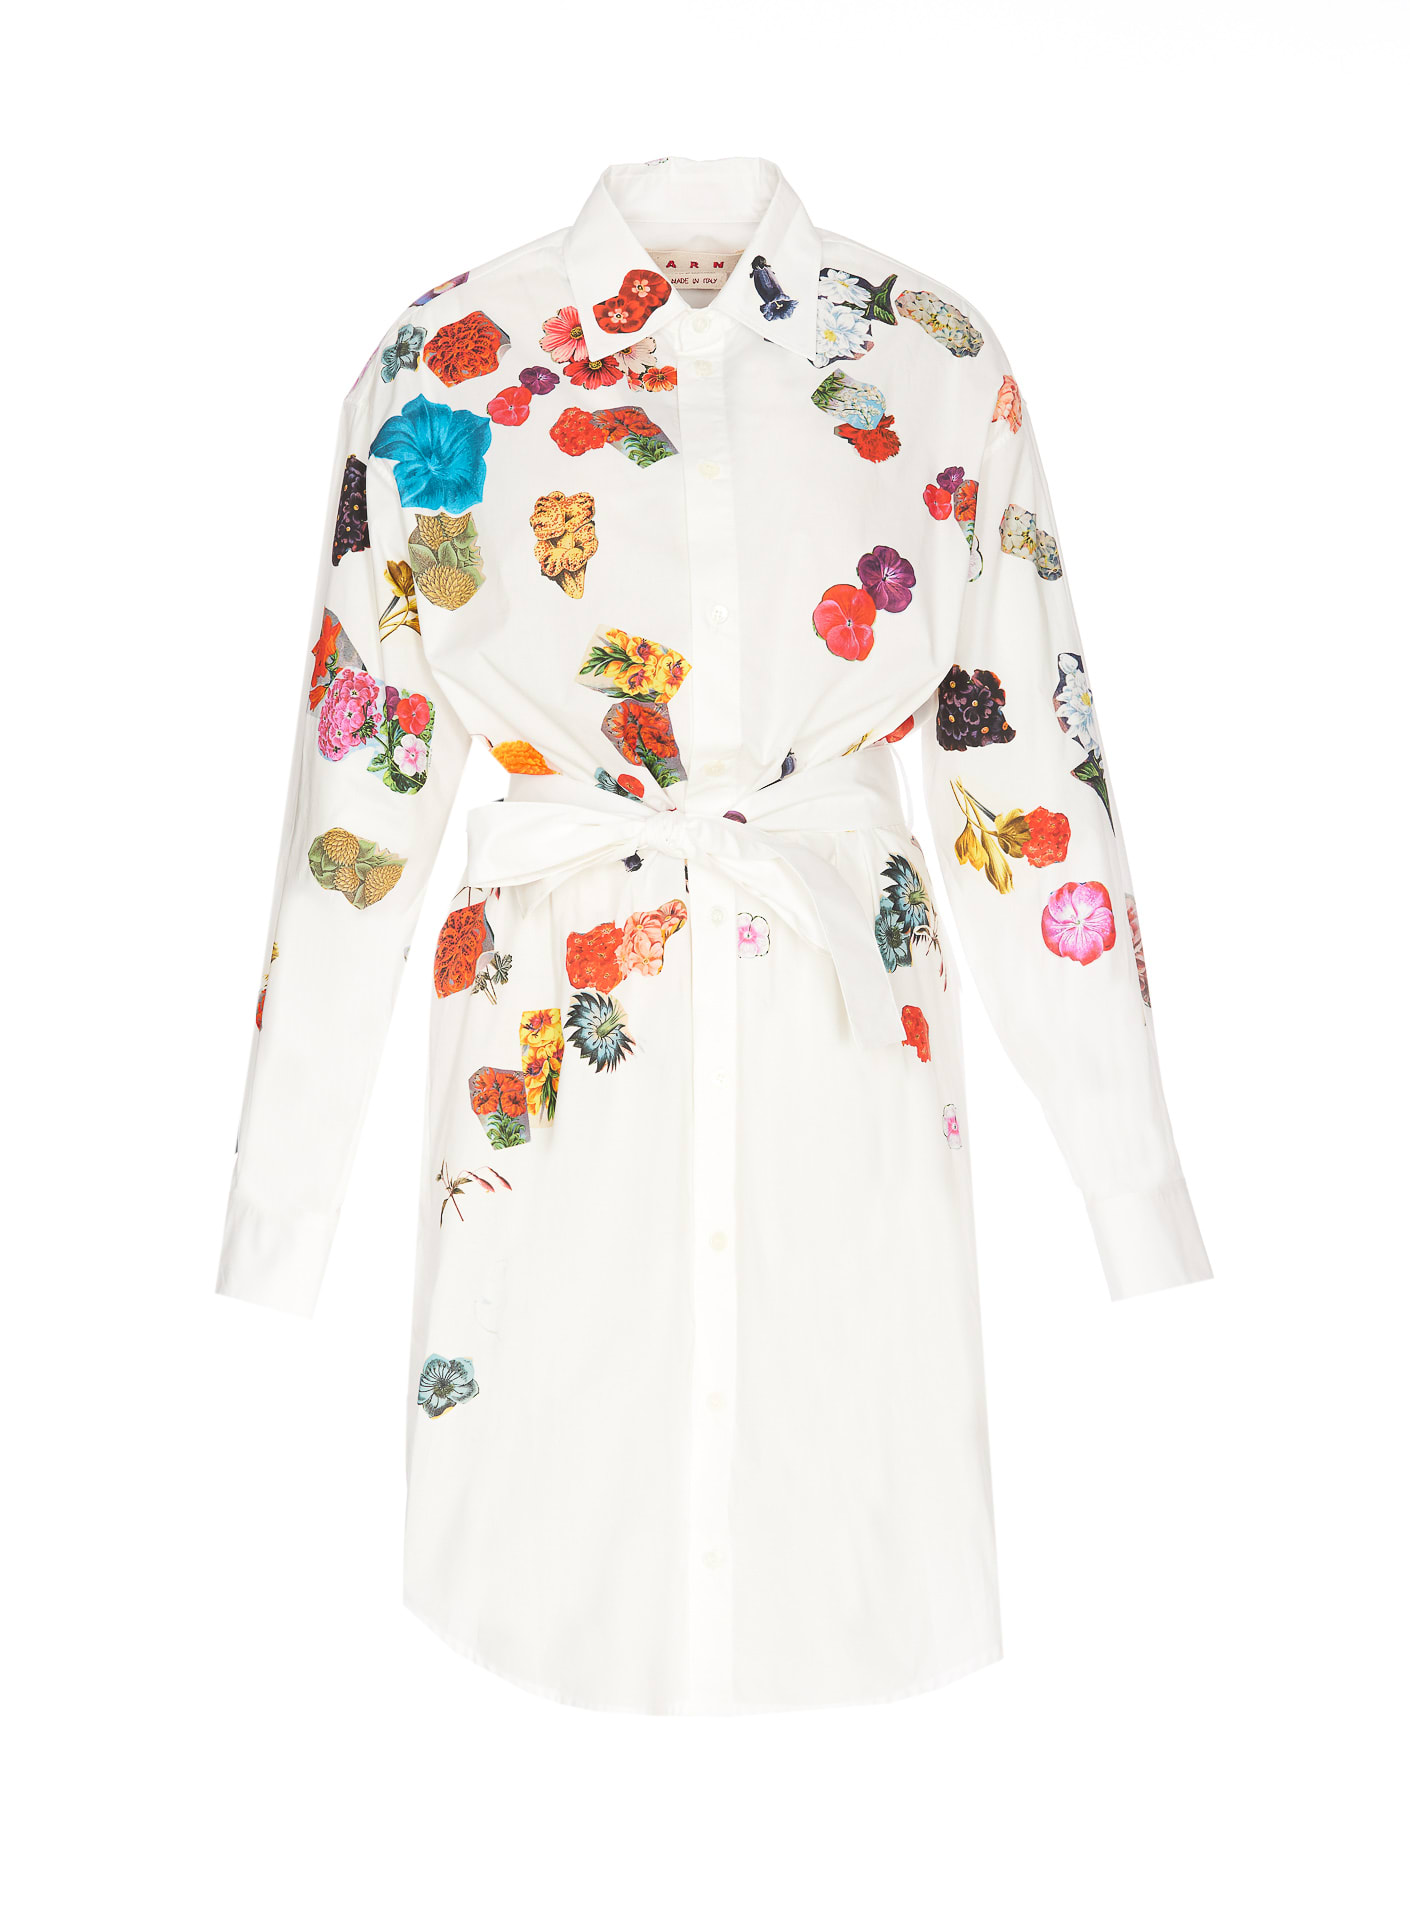 Marni Floral Print Dress In White